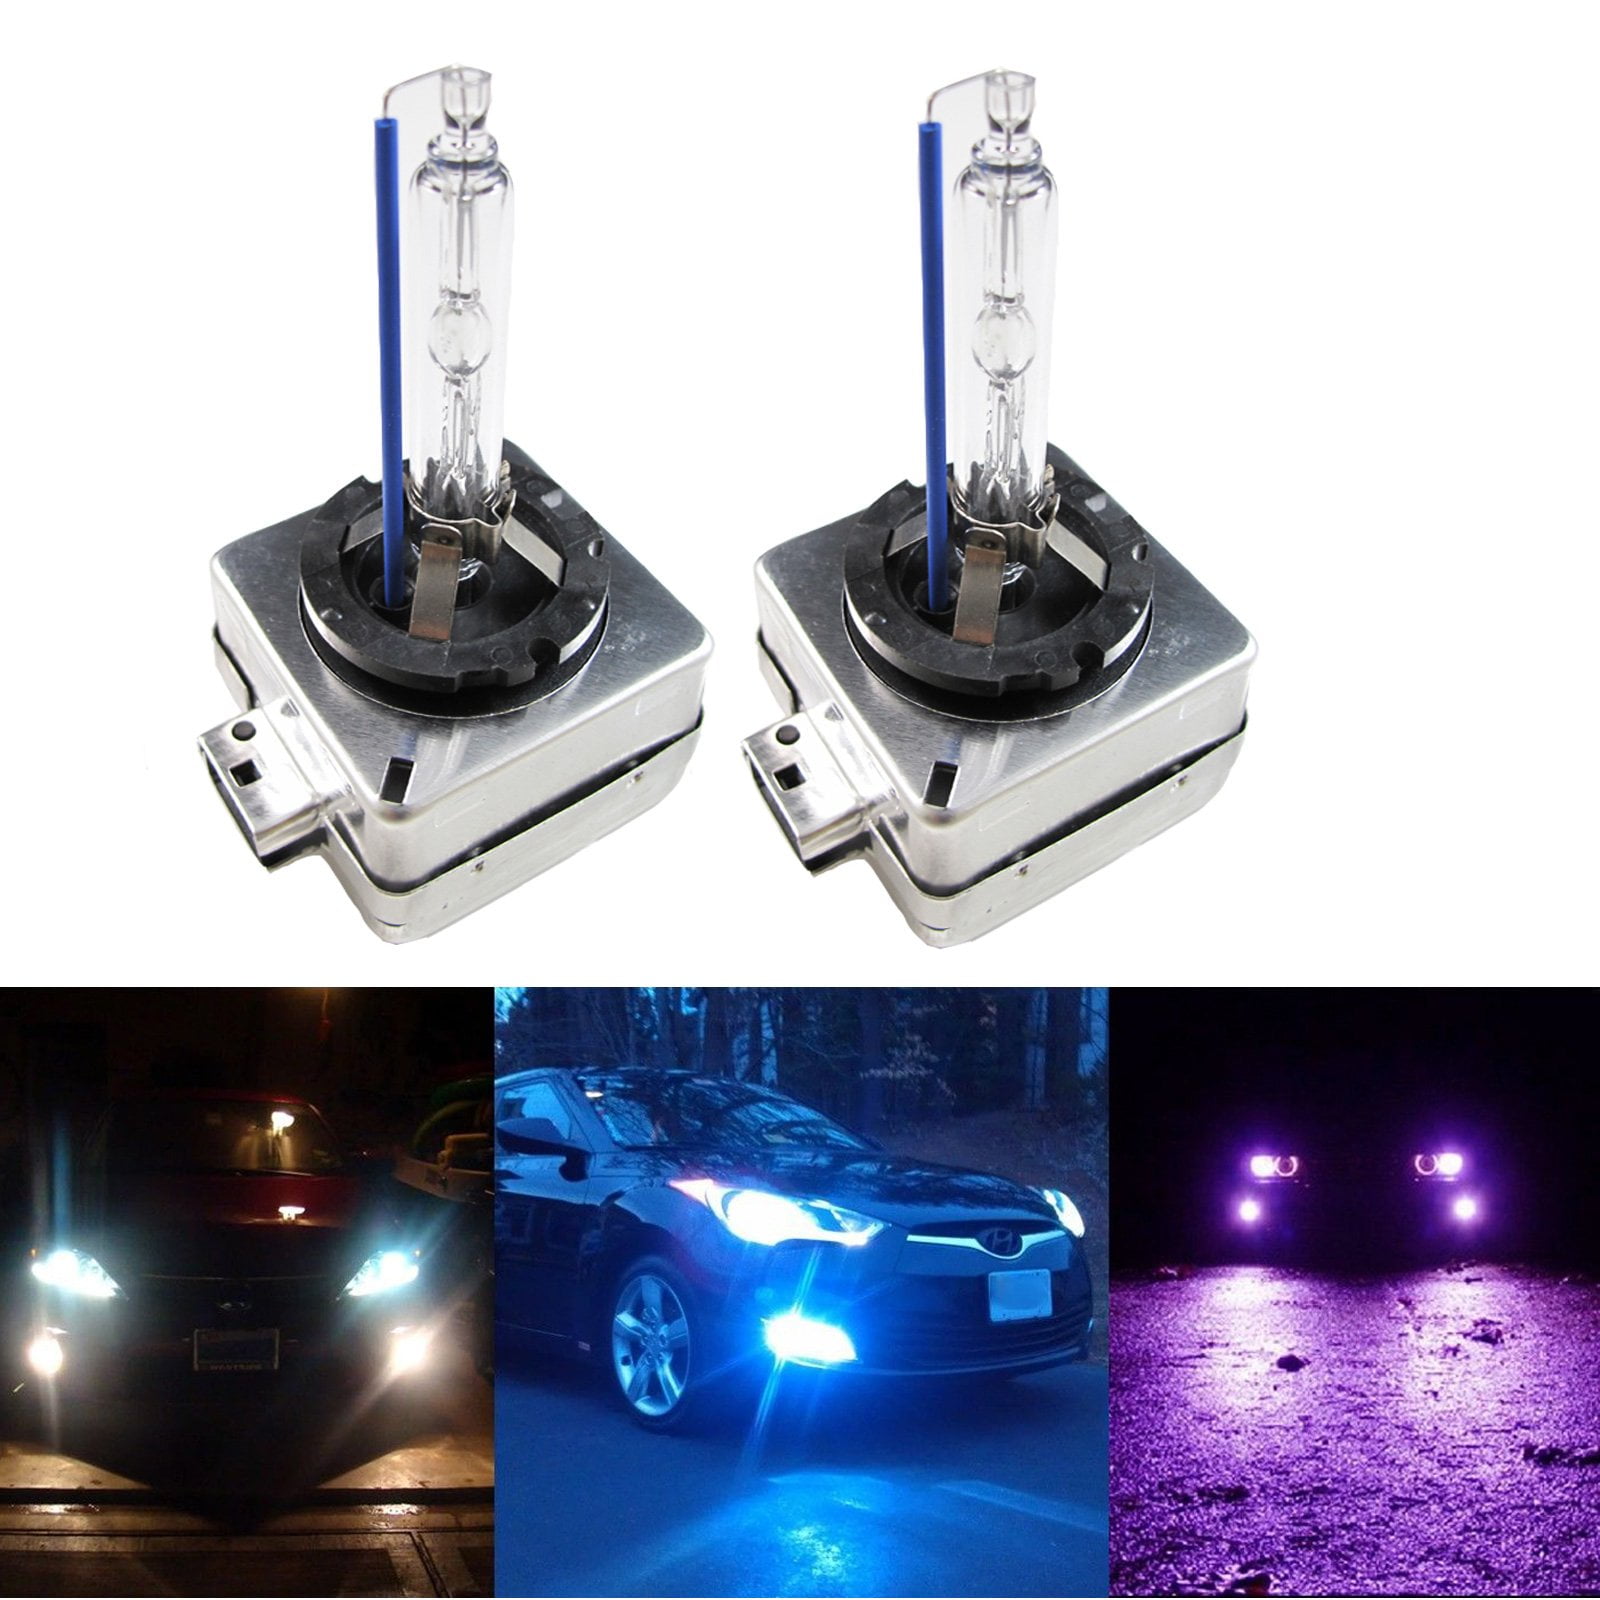 2x D2S Bulbs Xenon Hid 35W Ice Blue 8000K Low Beam For Nissan 370 Z 2009-2018